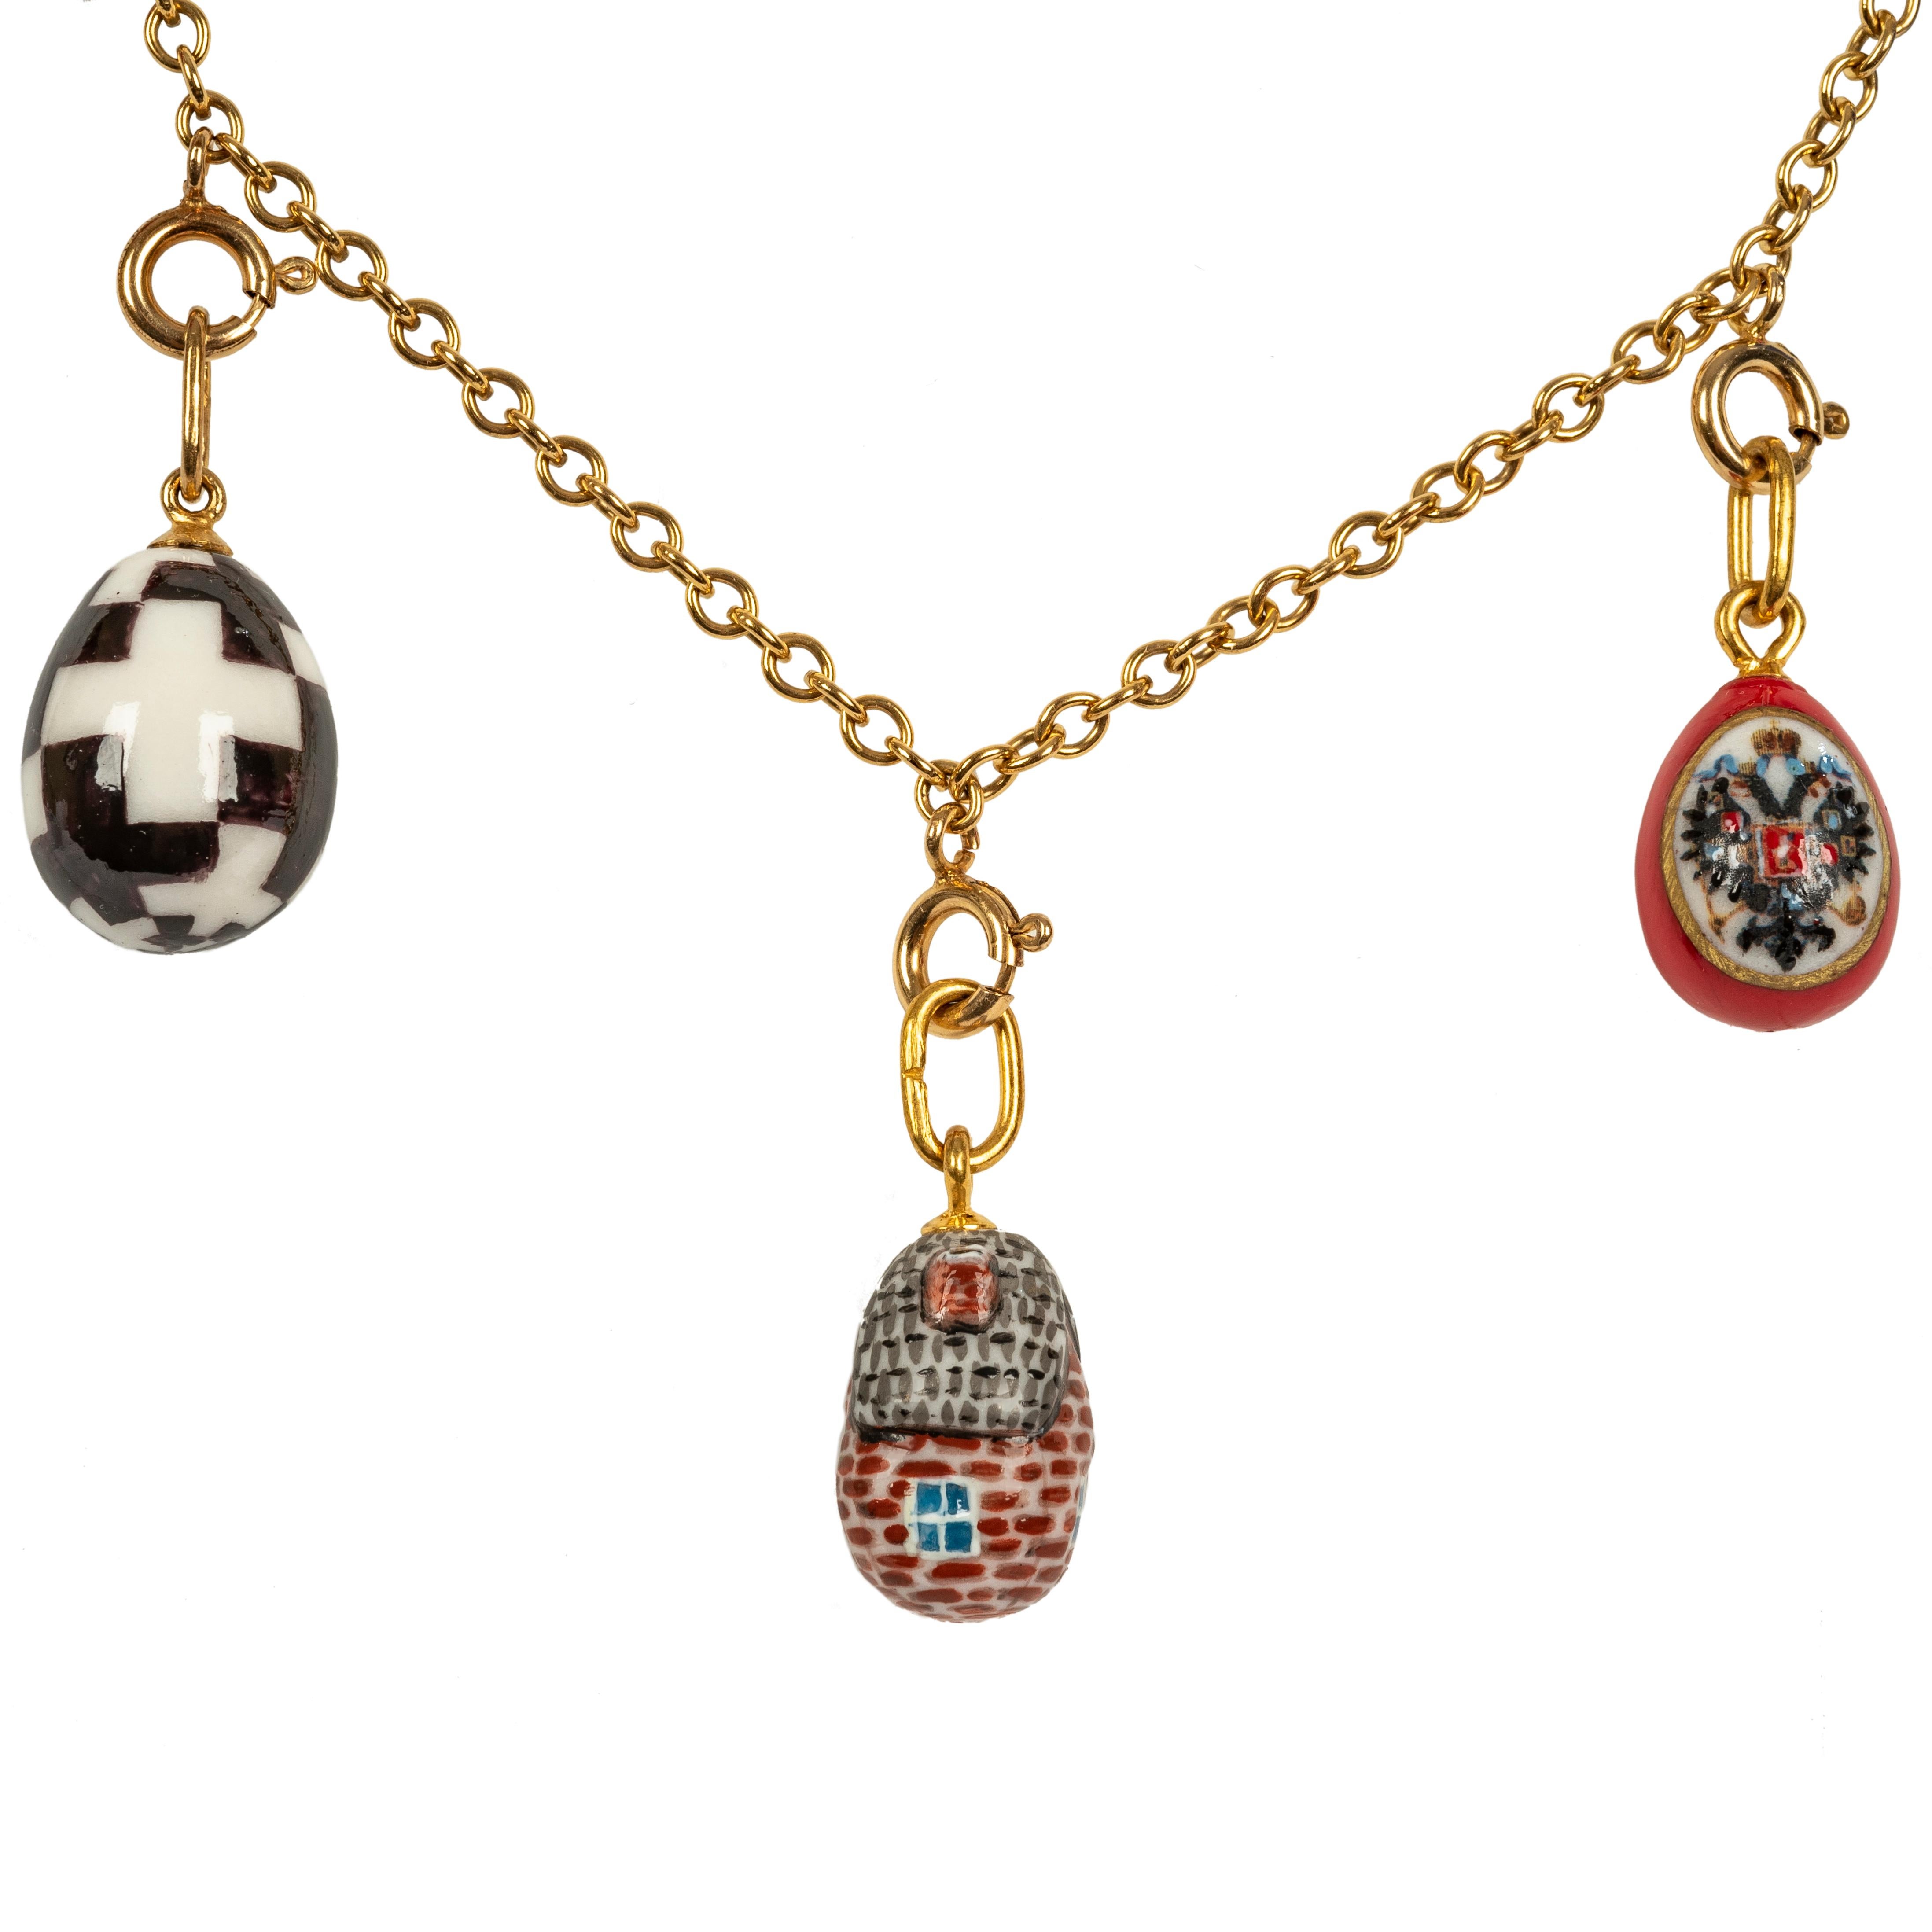 Designed as a classic link chain suspending nine hand painted egg pendants from St. Petersburg, Russia. 

In colorful porcelain depicting a fairy tale dacha with thatched roof, a Romanov double-headed eagle and a landscape of Russian churches among